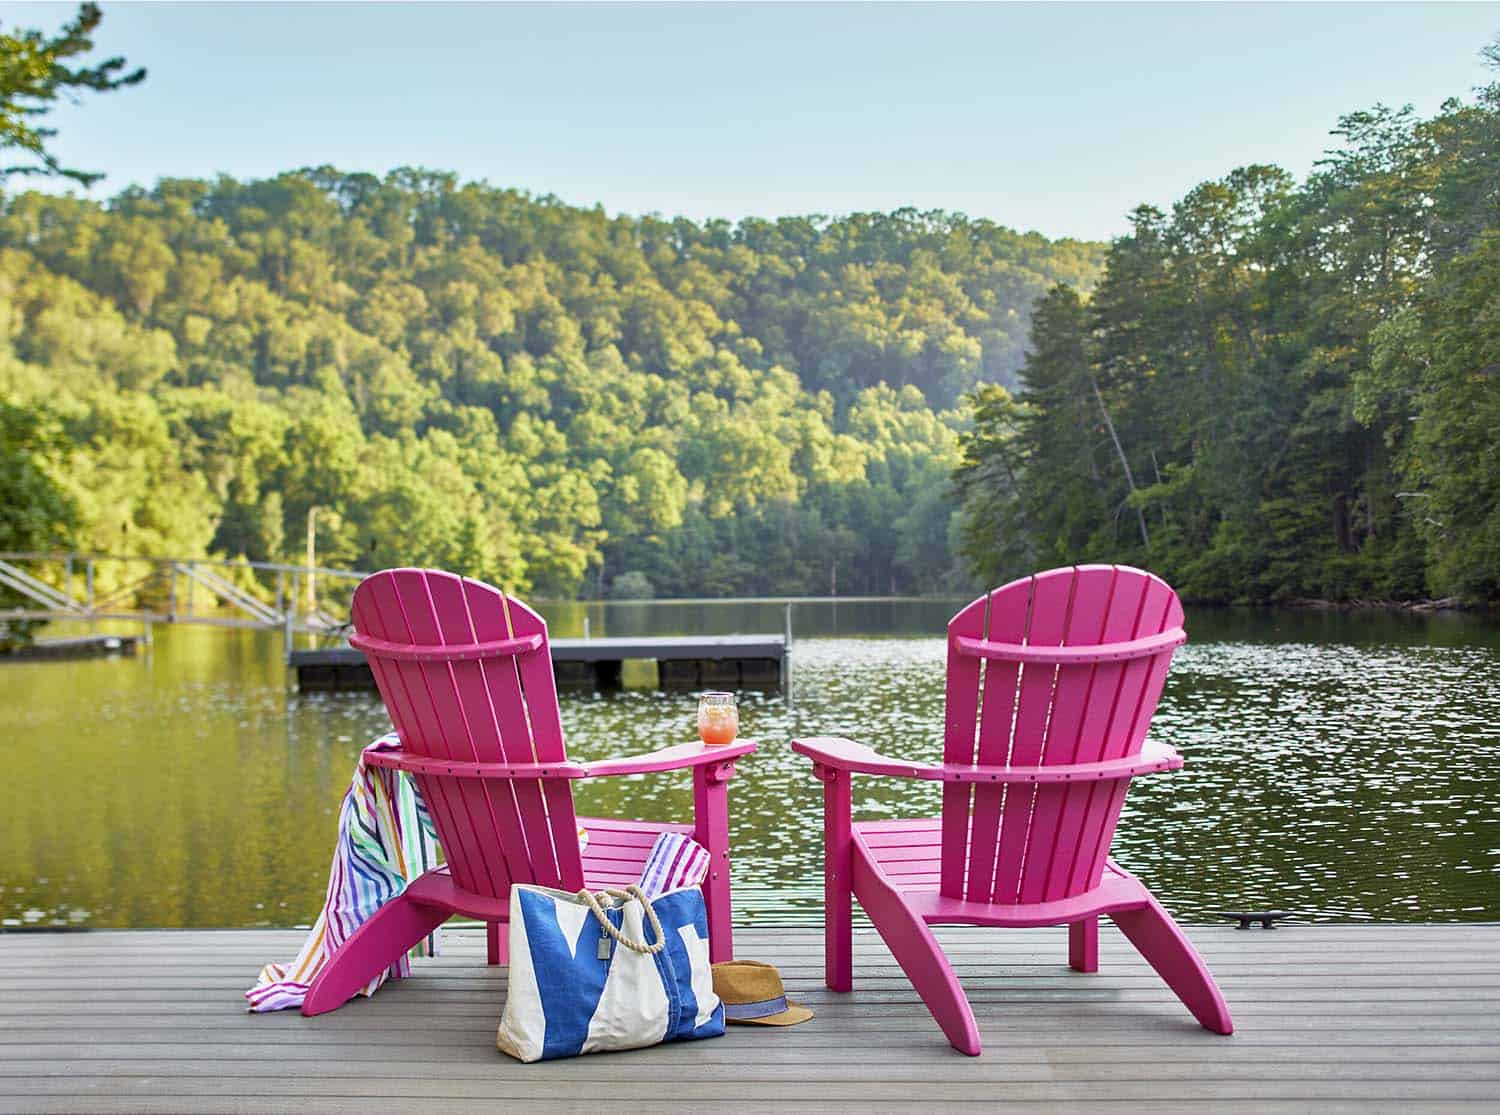 rustic-deck-overlooking-a-north-carolina-lake-with-pink-adirondack-chairs